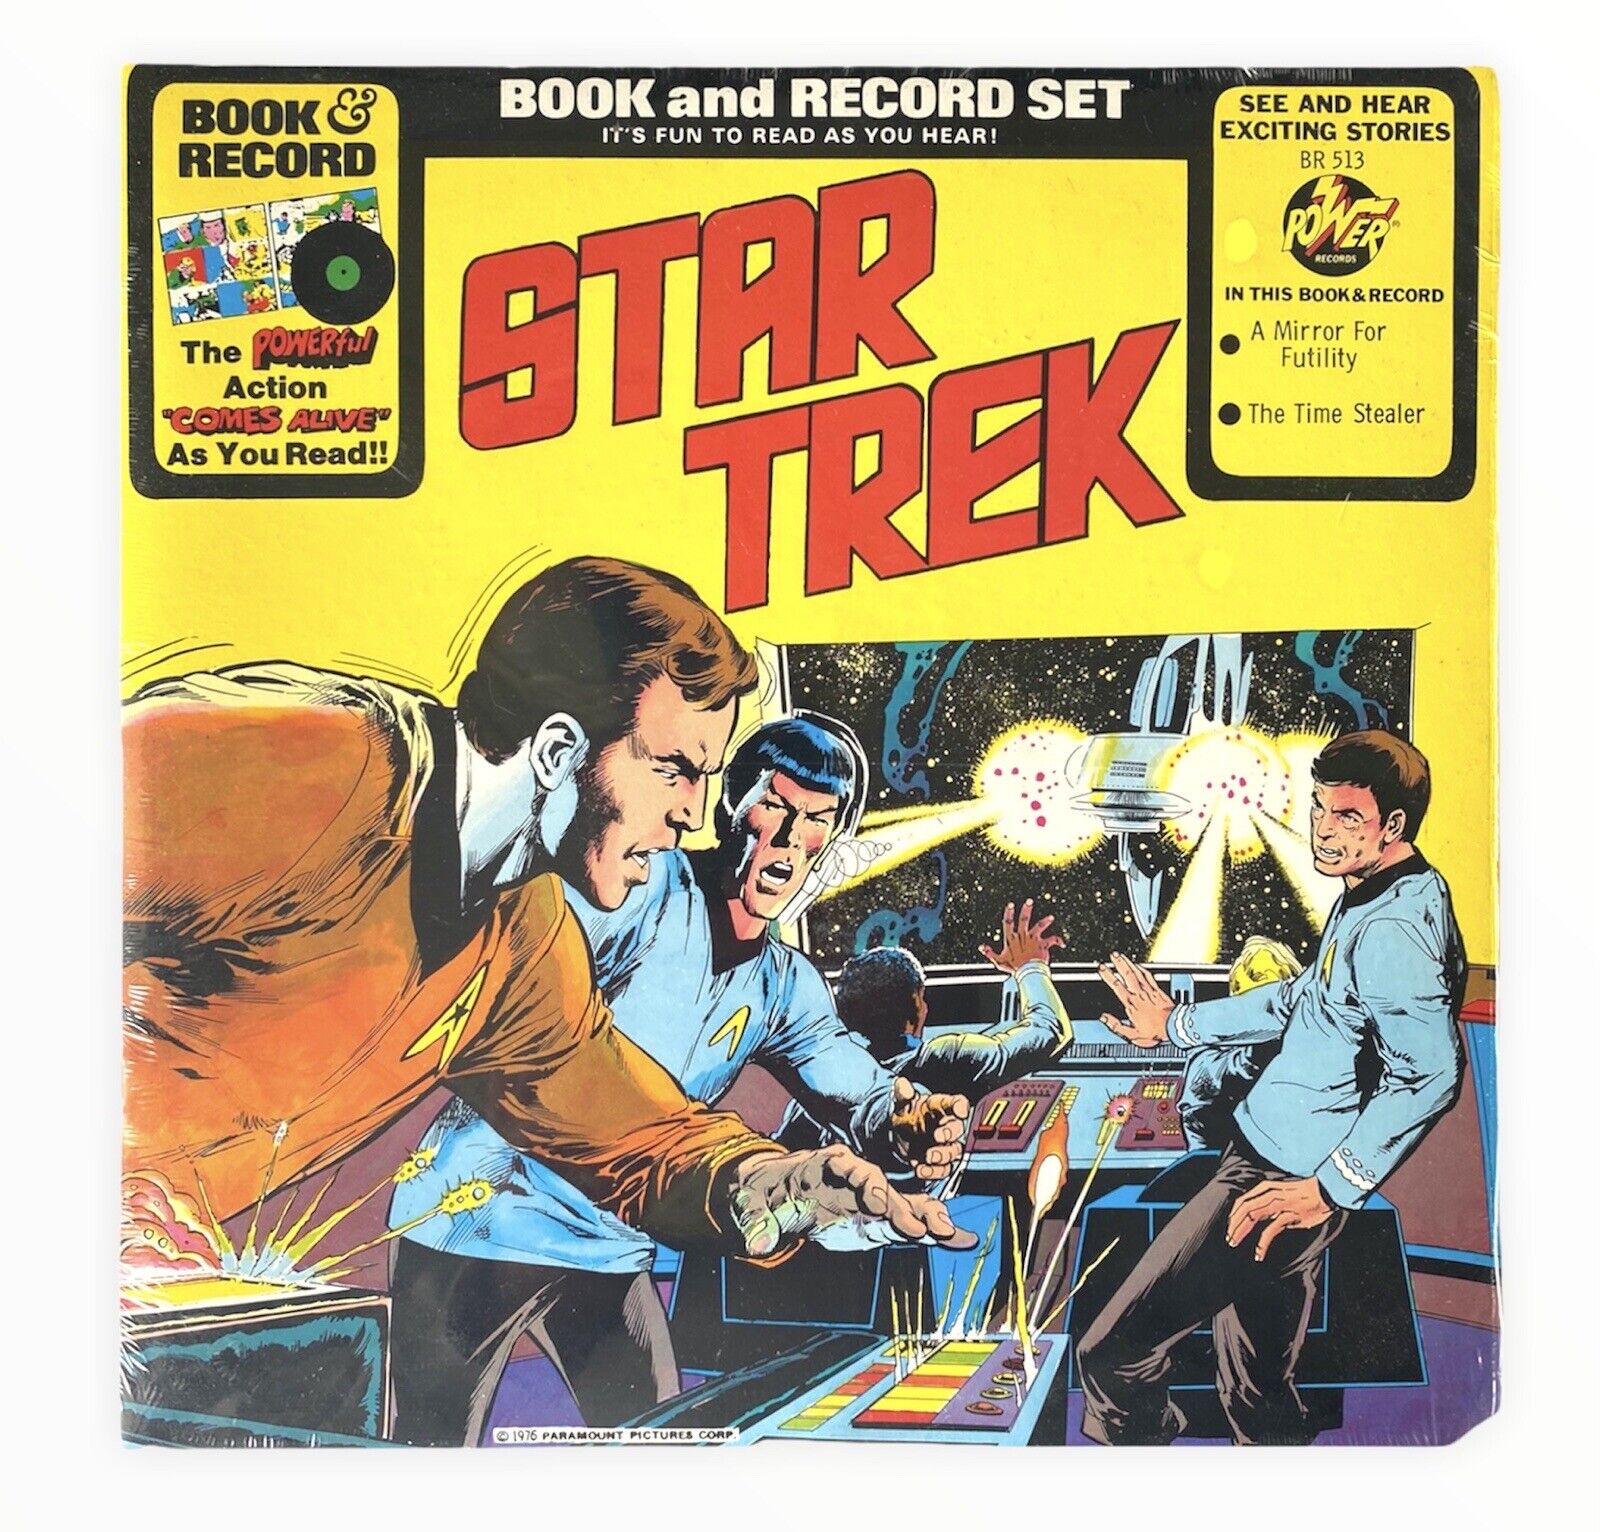 1976 STAR TREK Book and Record Set - New/Sealed - Power Records BR513 Peter Pan